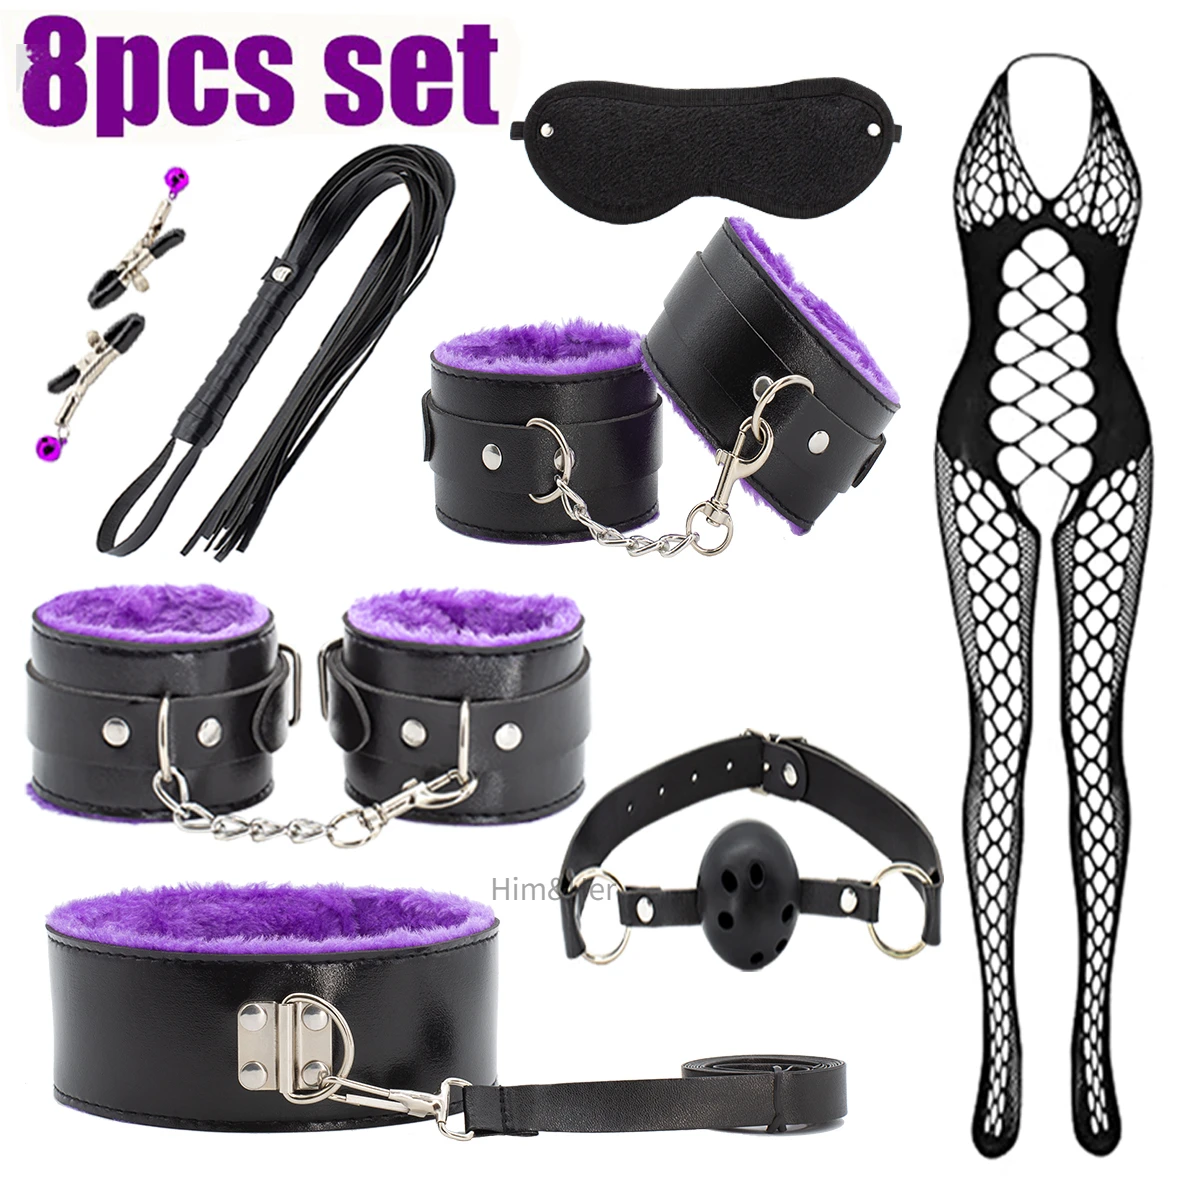 NEW BDSM Sexy Leather Plush Sex Bondage Set Handcuffs Sex Games Whip Gag Nipple Clamps Sex Toys Sex Appeal Multiple Choices 18+ Sex Toys For Couple cb5feb1b7314637725a2e7: Dark Gray|Dark khaki|Flesh|Gold|Green|Light Green|Light Grey|Light yellow|Mixed Colors|Orange|Pink|Plum|Purple|Red|Silver|Sky Blue|Transparent|Violet|White|Yellow